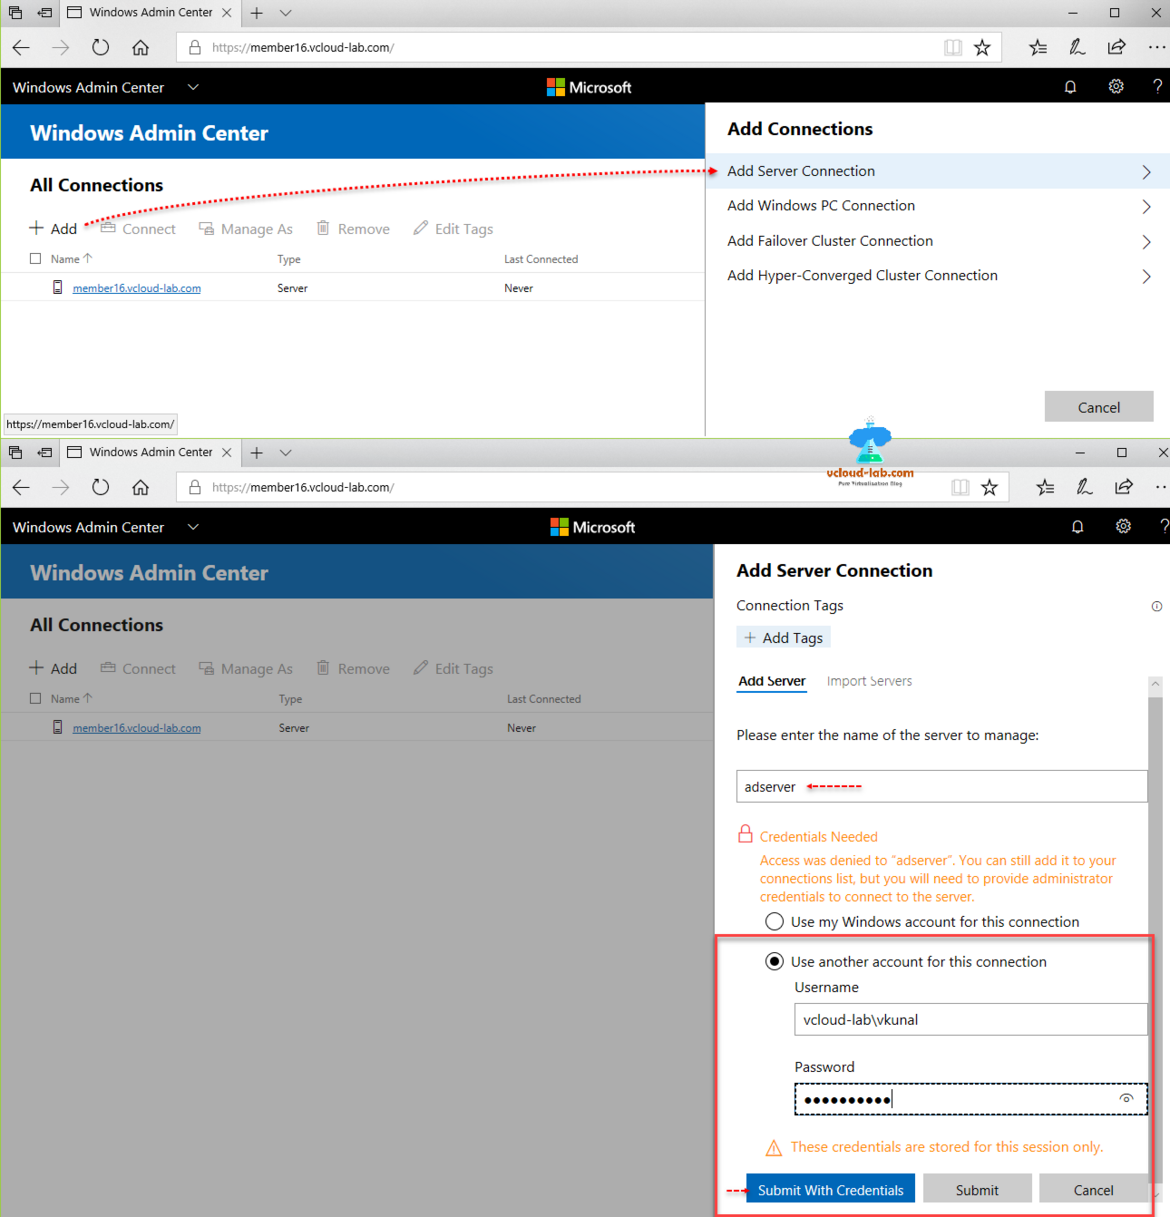 Windows admin center, project honolulu, Add connection server connection, add server tages, credentials